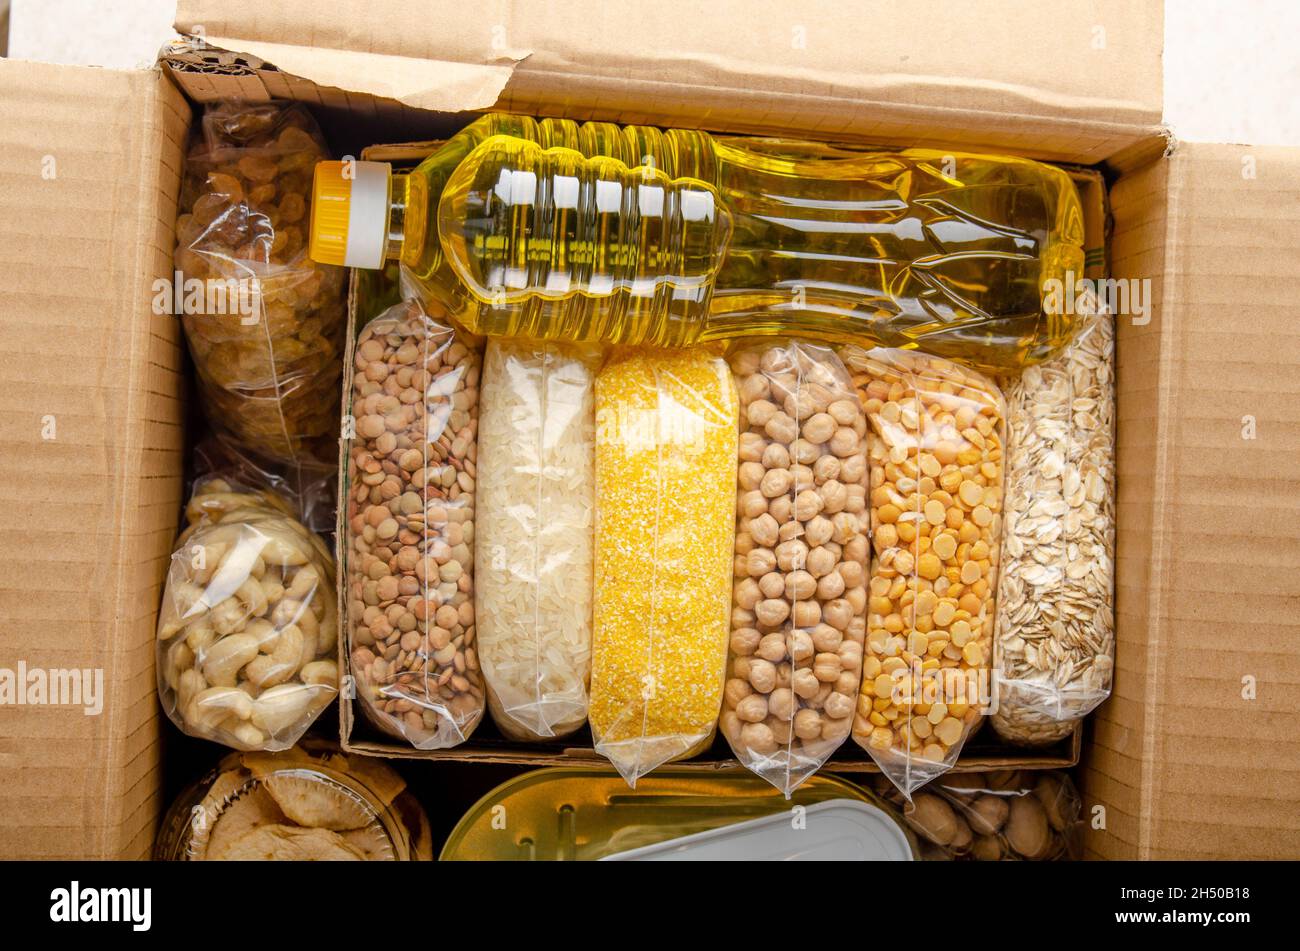 Flat lay view at uncooked foods in carton box prepared for disaster emergency conditions or giving away Stock Photo